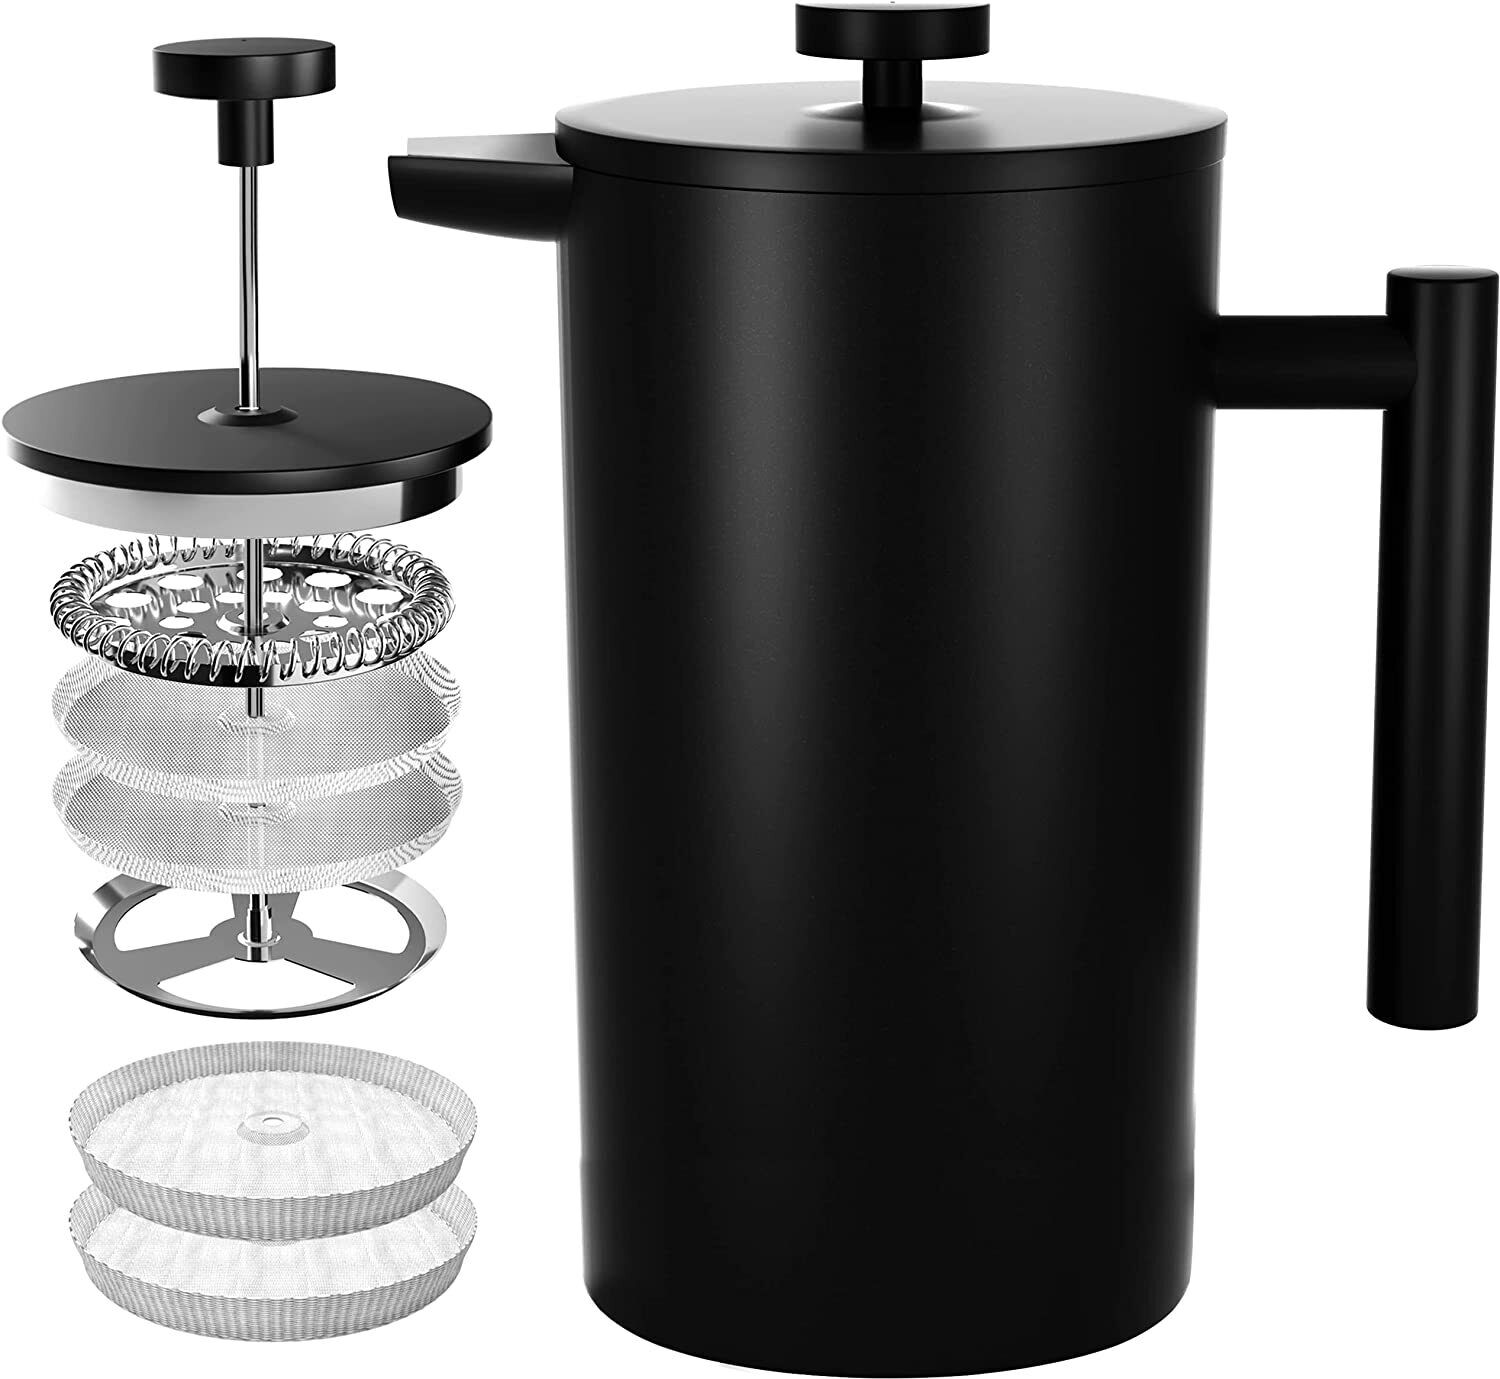 French Press Coffee Maker304-Grade Stainless Steel-2 Extra Filter Utopia Kitchen